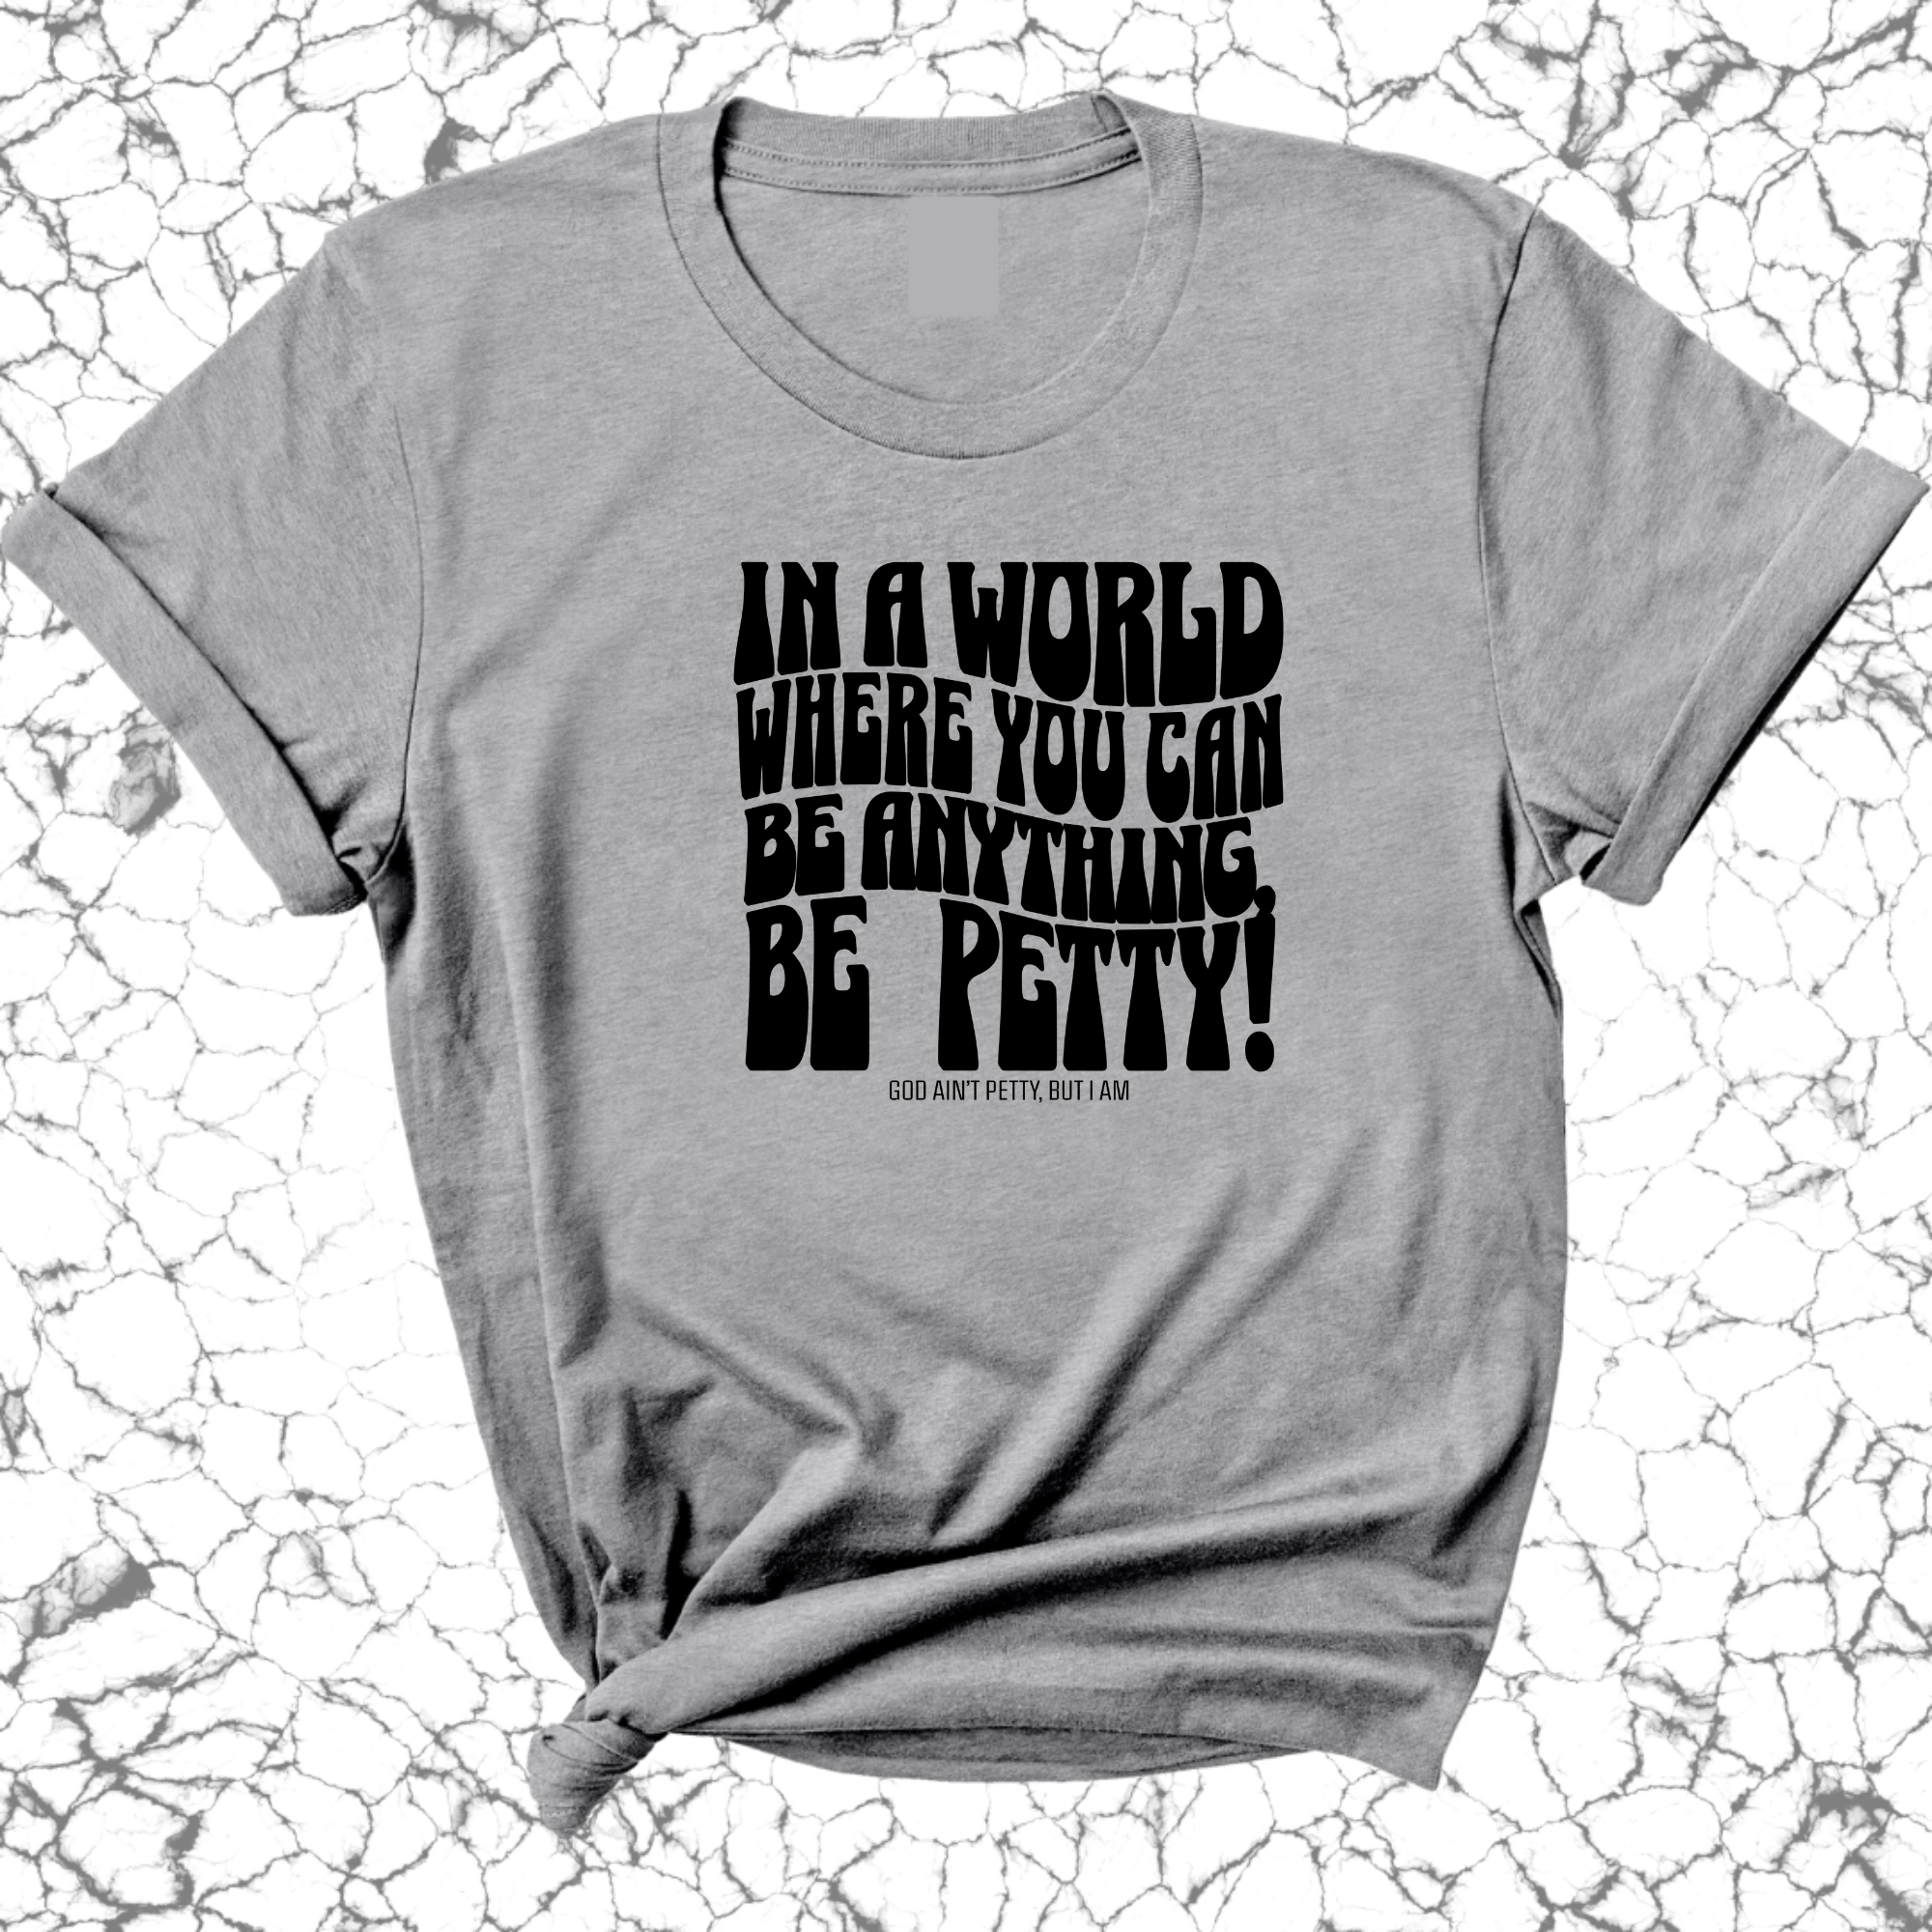 In a world where you can be anything, BE PETTY Unisex Tee-T-Shirt-The Original God Ain't Petty But I Am